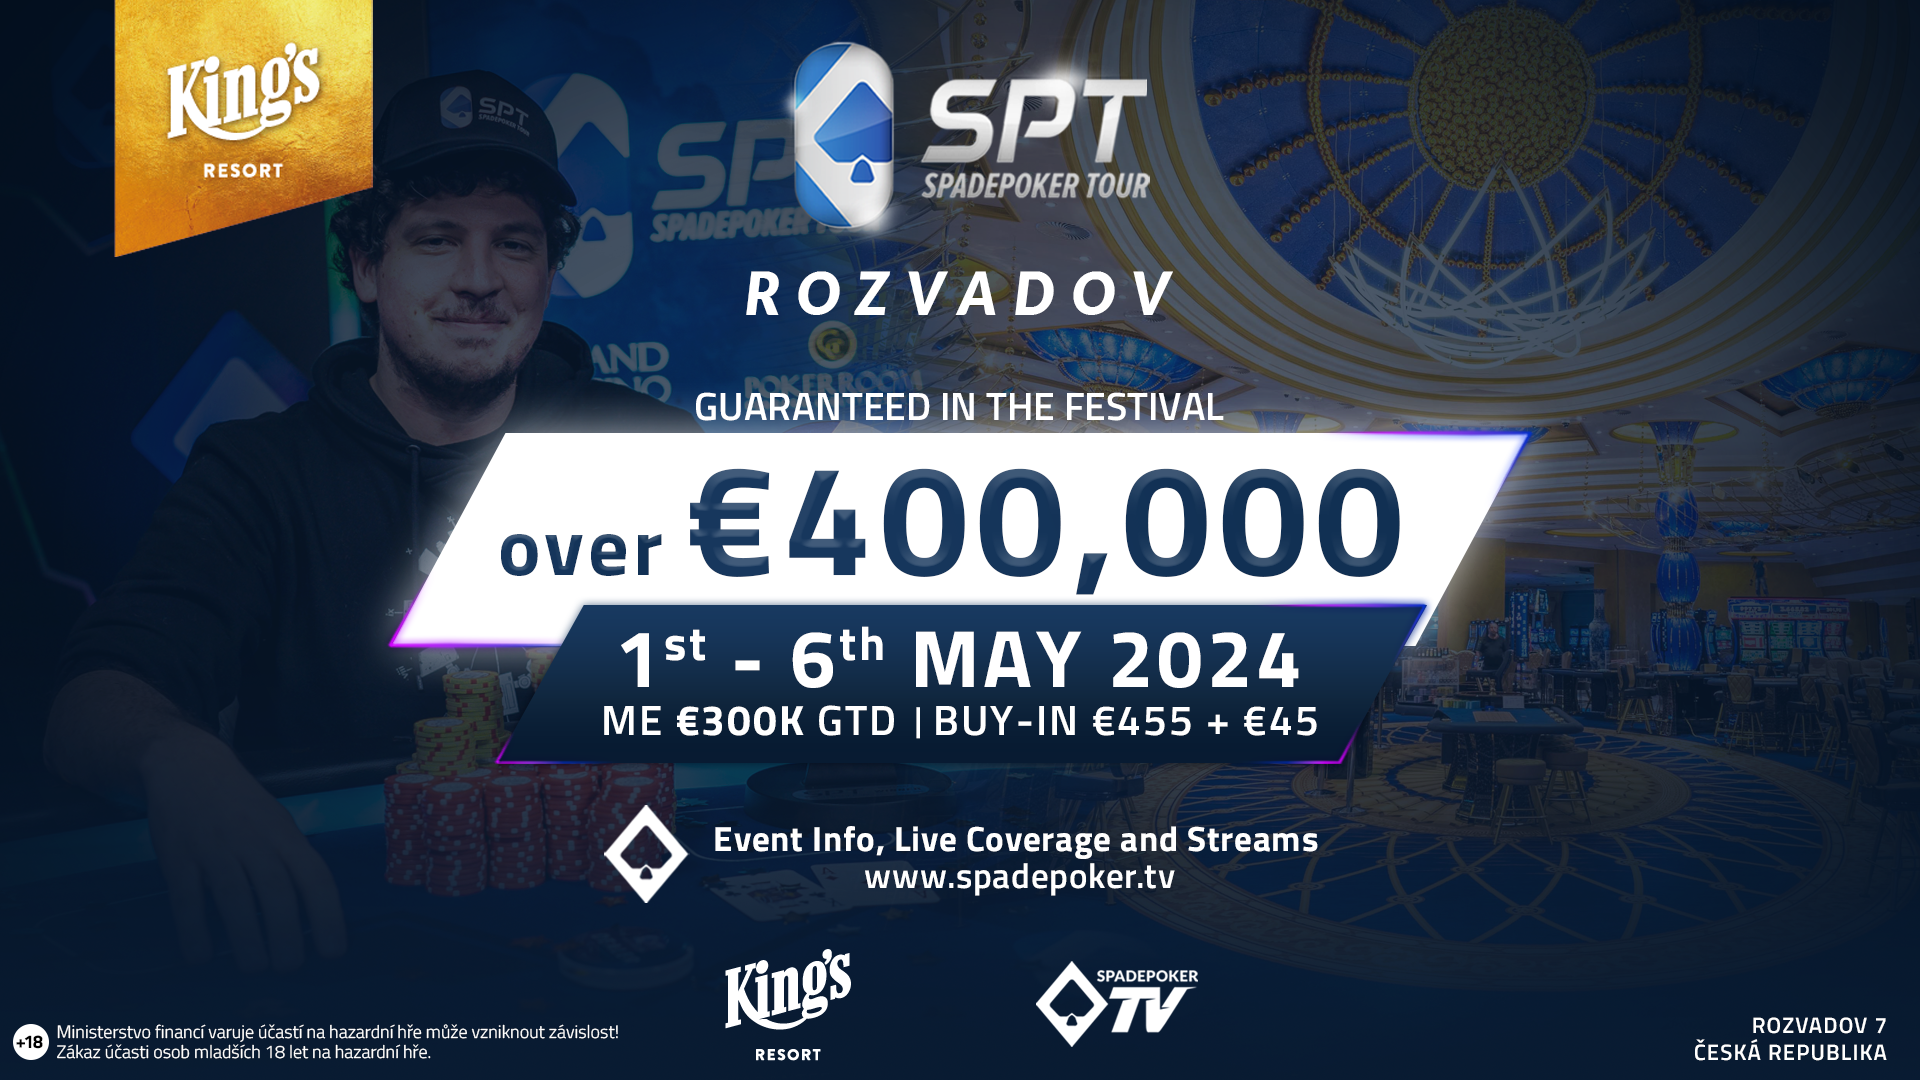 The Spadepoker Tour is back, with at least €400,000 up for grabs at the King's Resort Rozvadov in May!